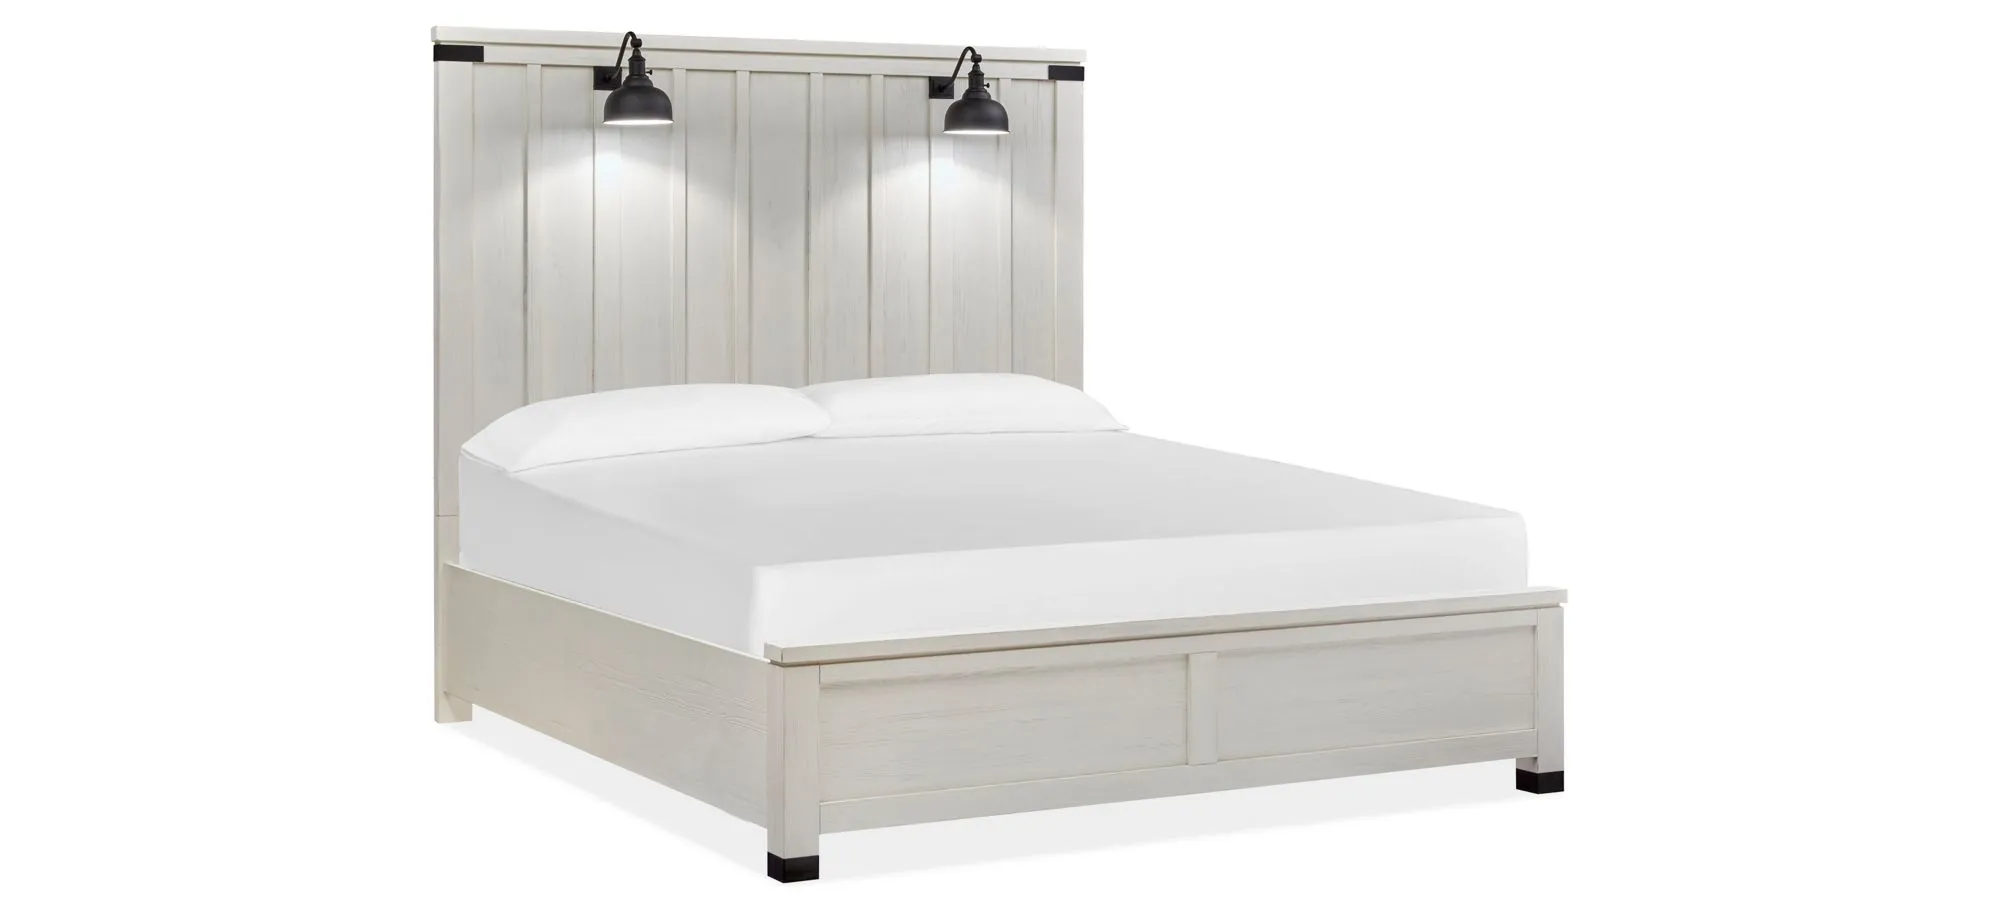 Harper Springs Panel Bed with Lighting in Silo White by Magnussen Home